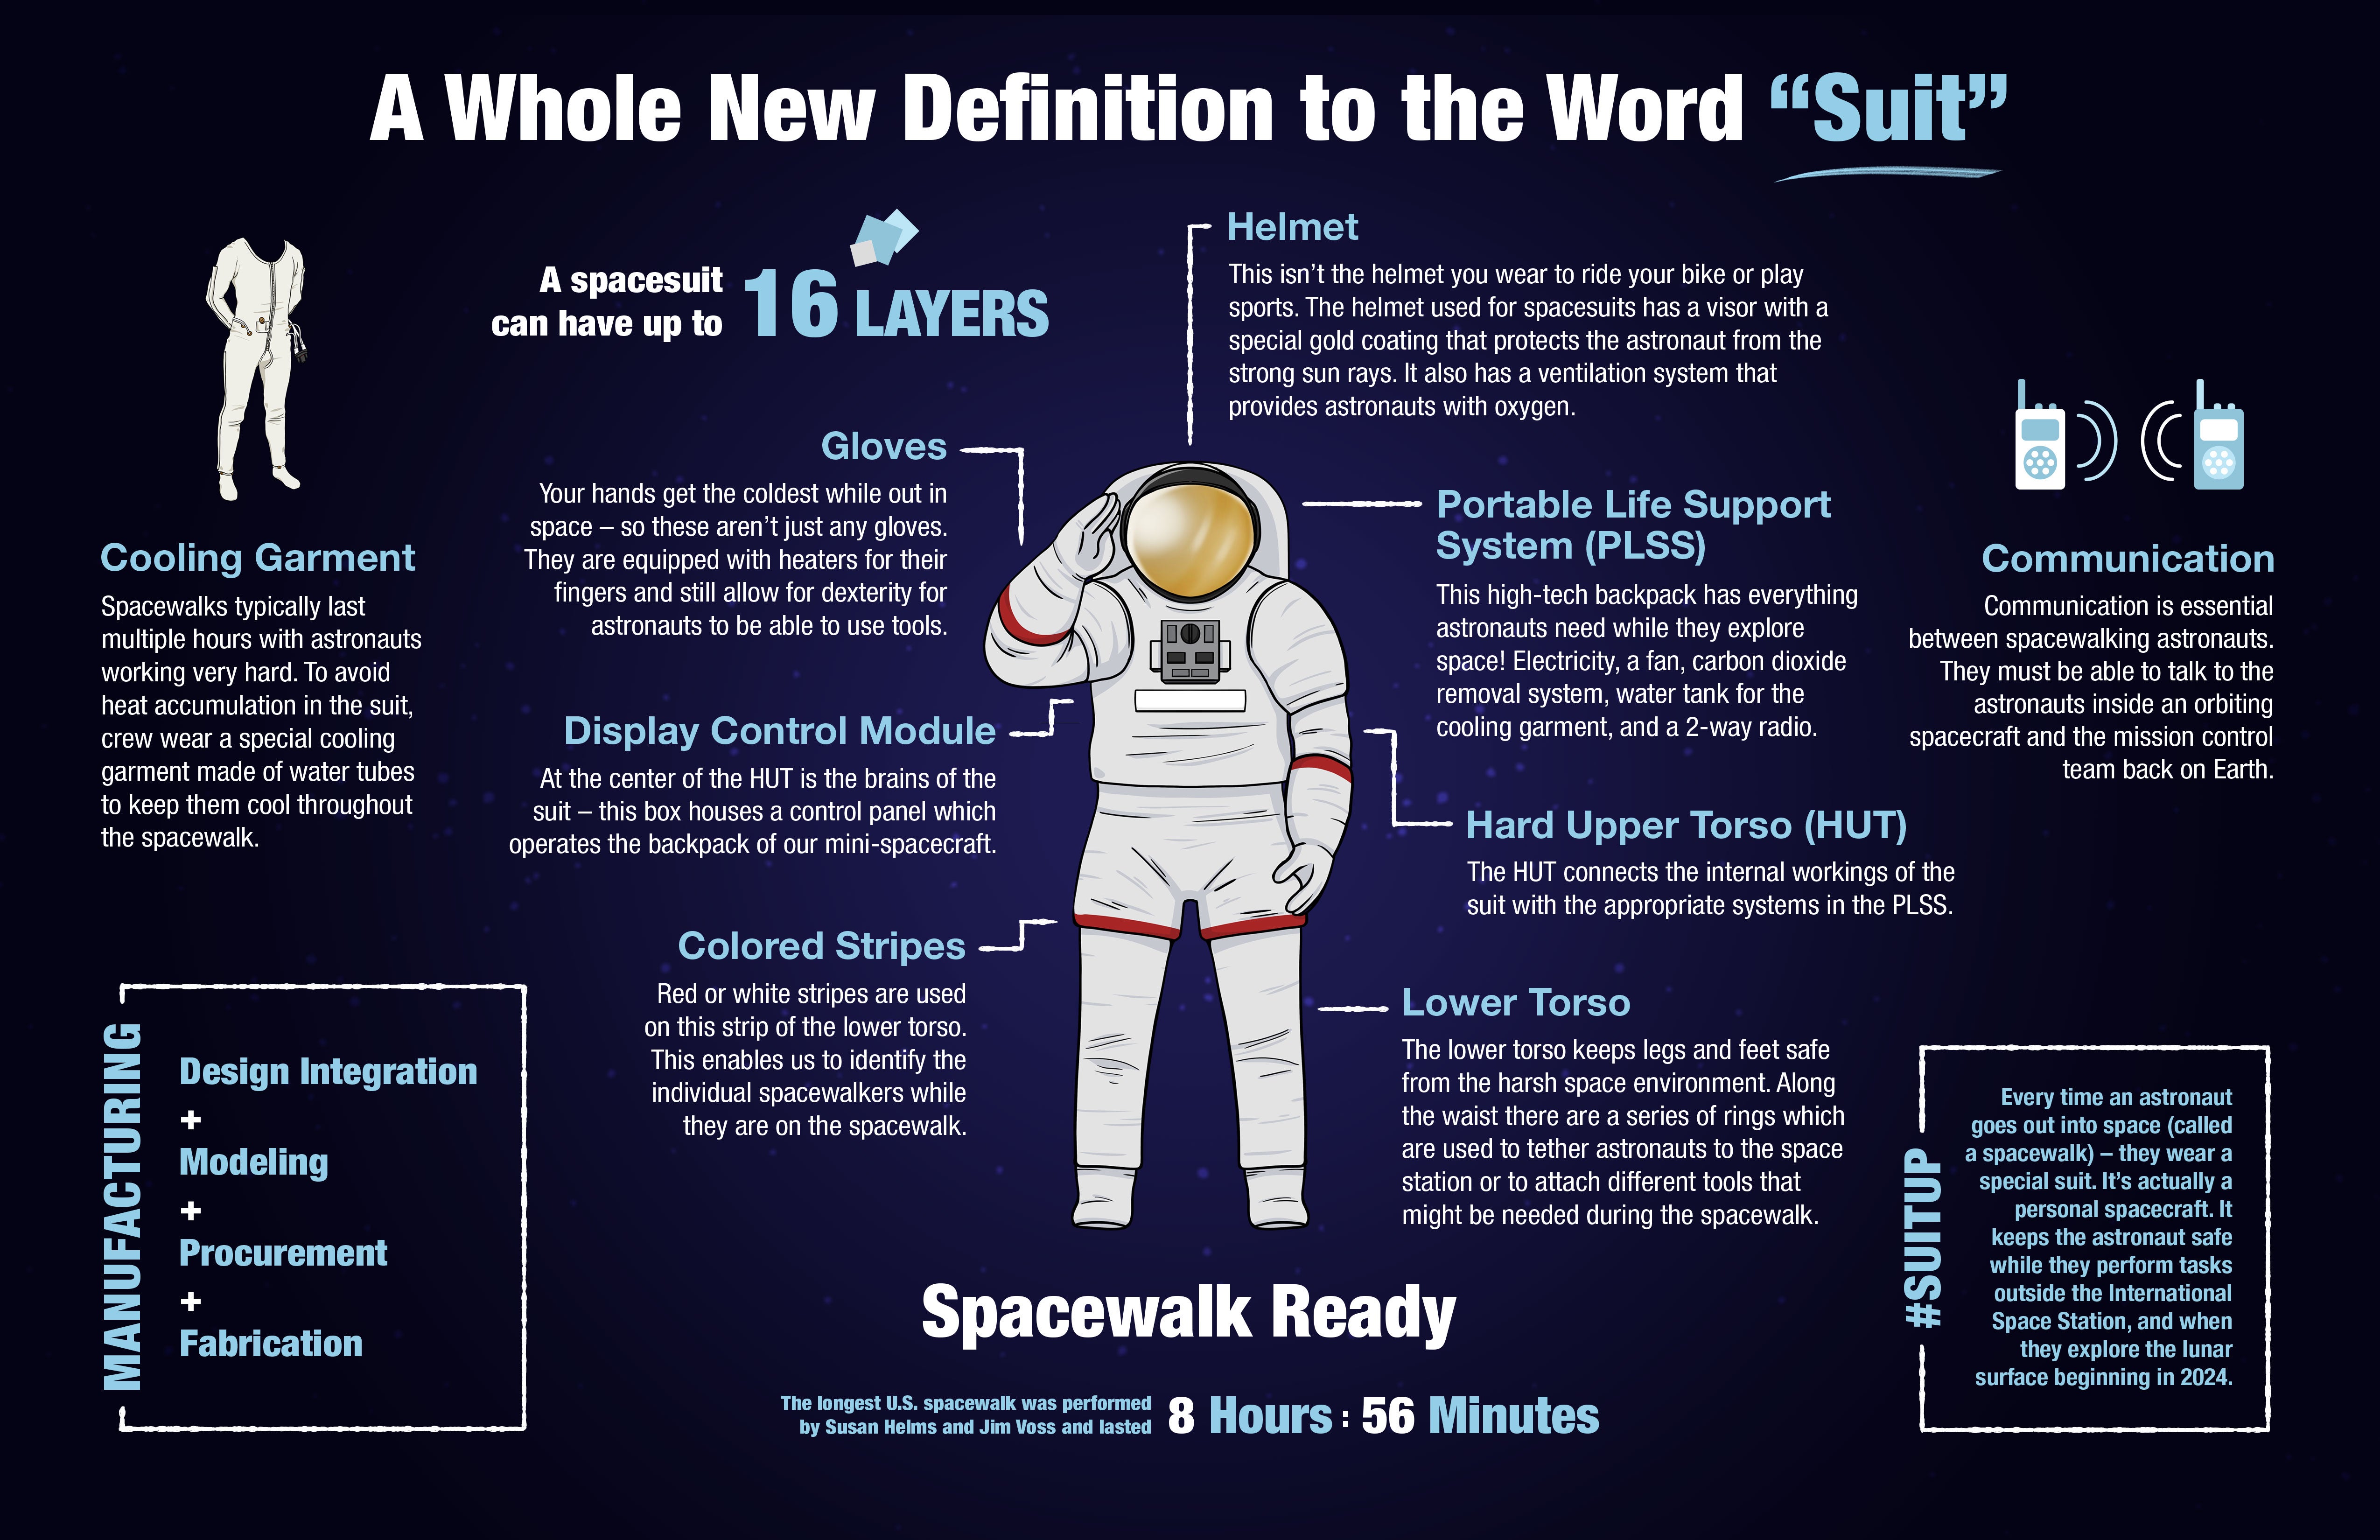 NASA graphic describing the primary functions of its proposed Moon spacesuit. Axiom's suit will very likely borrow heavily from this design.  (Image: NASA)